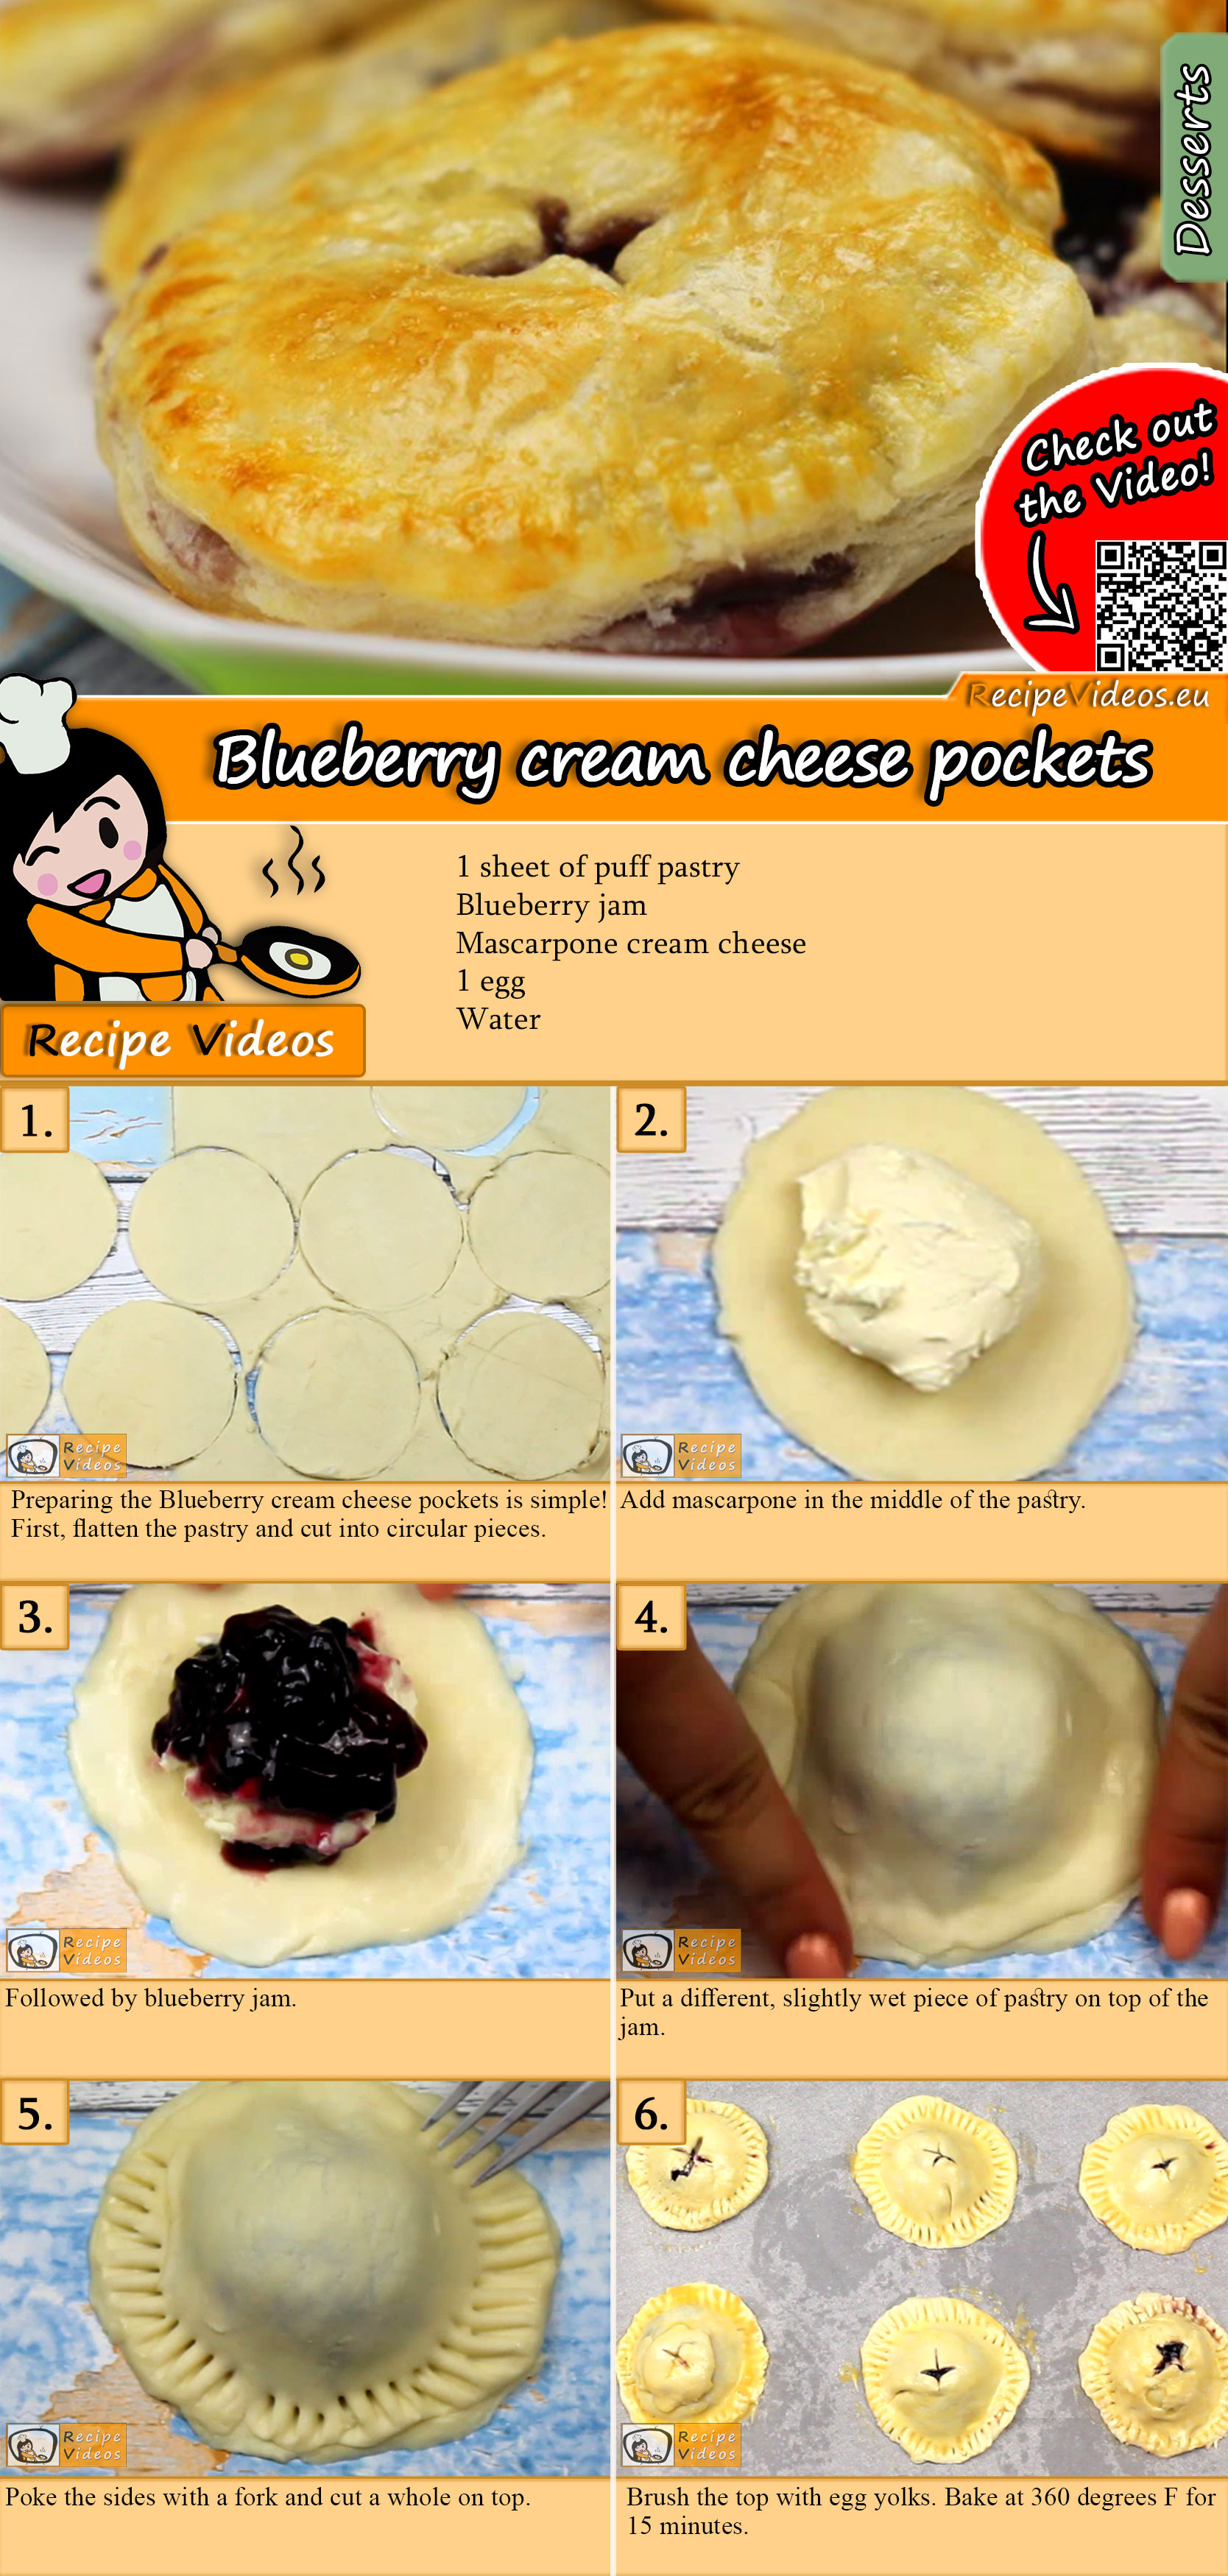 Blueberry cream cheese pockets recipe with video